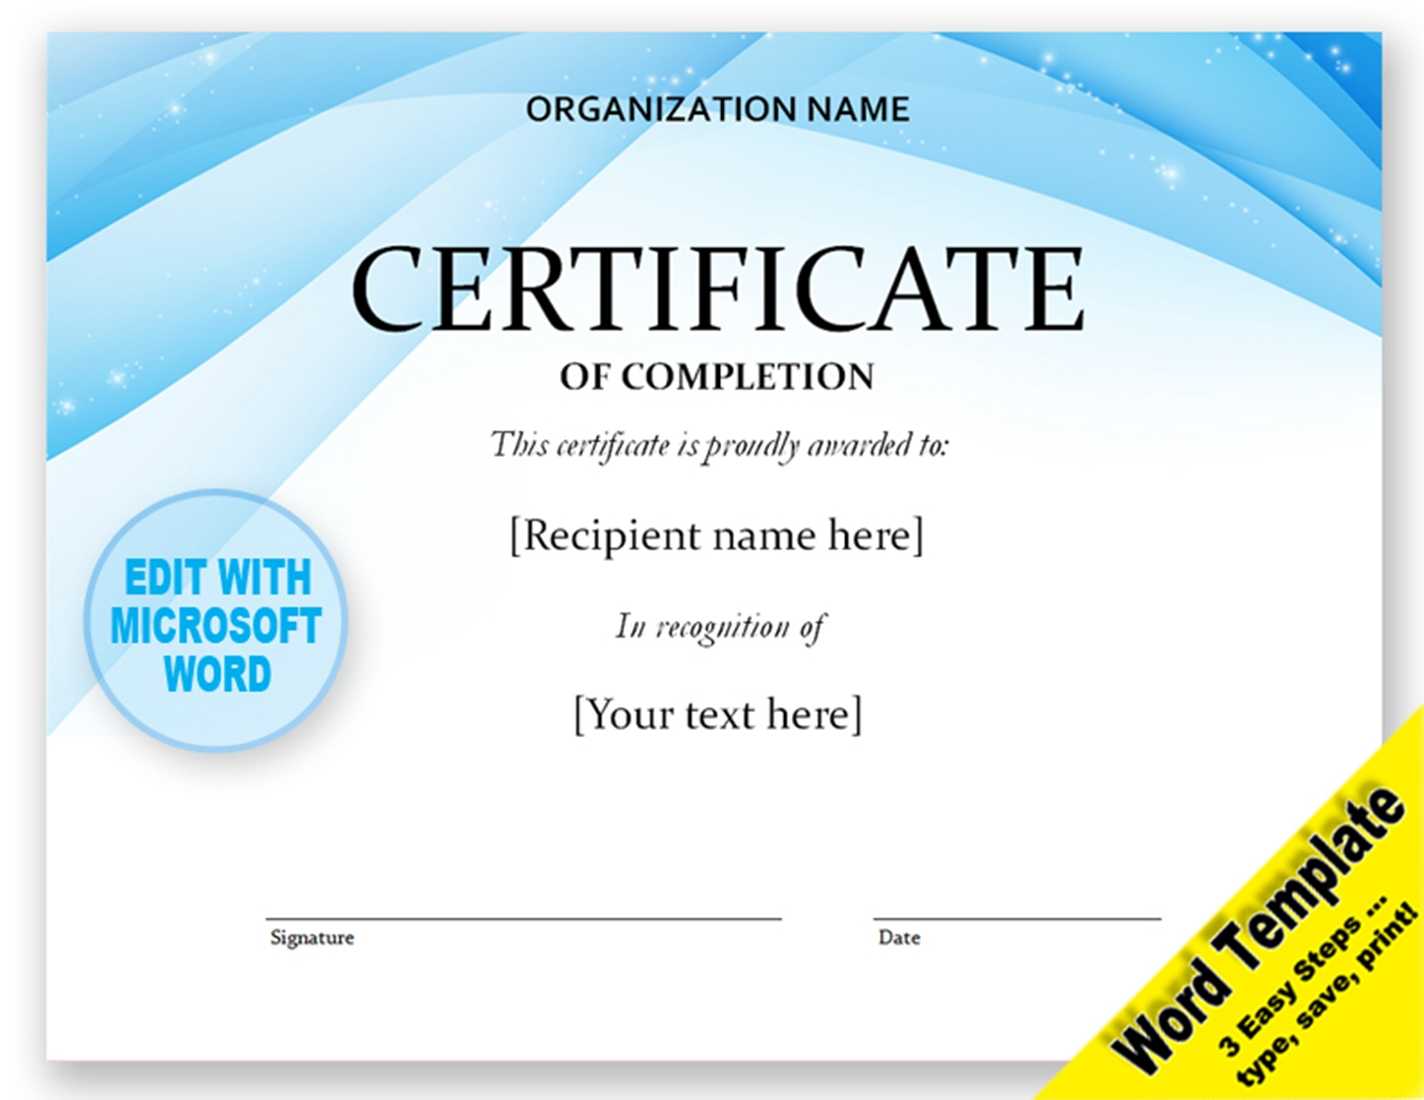 Contemporary Certificate Of Completion Template Digital Download Intended For Certificate Of Completion Word Template